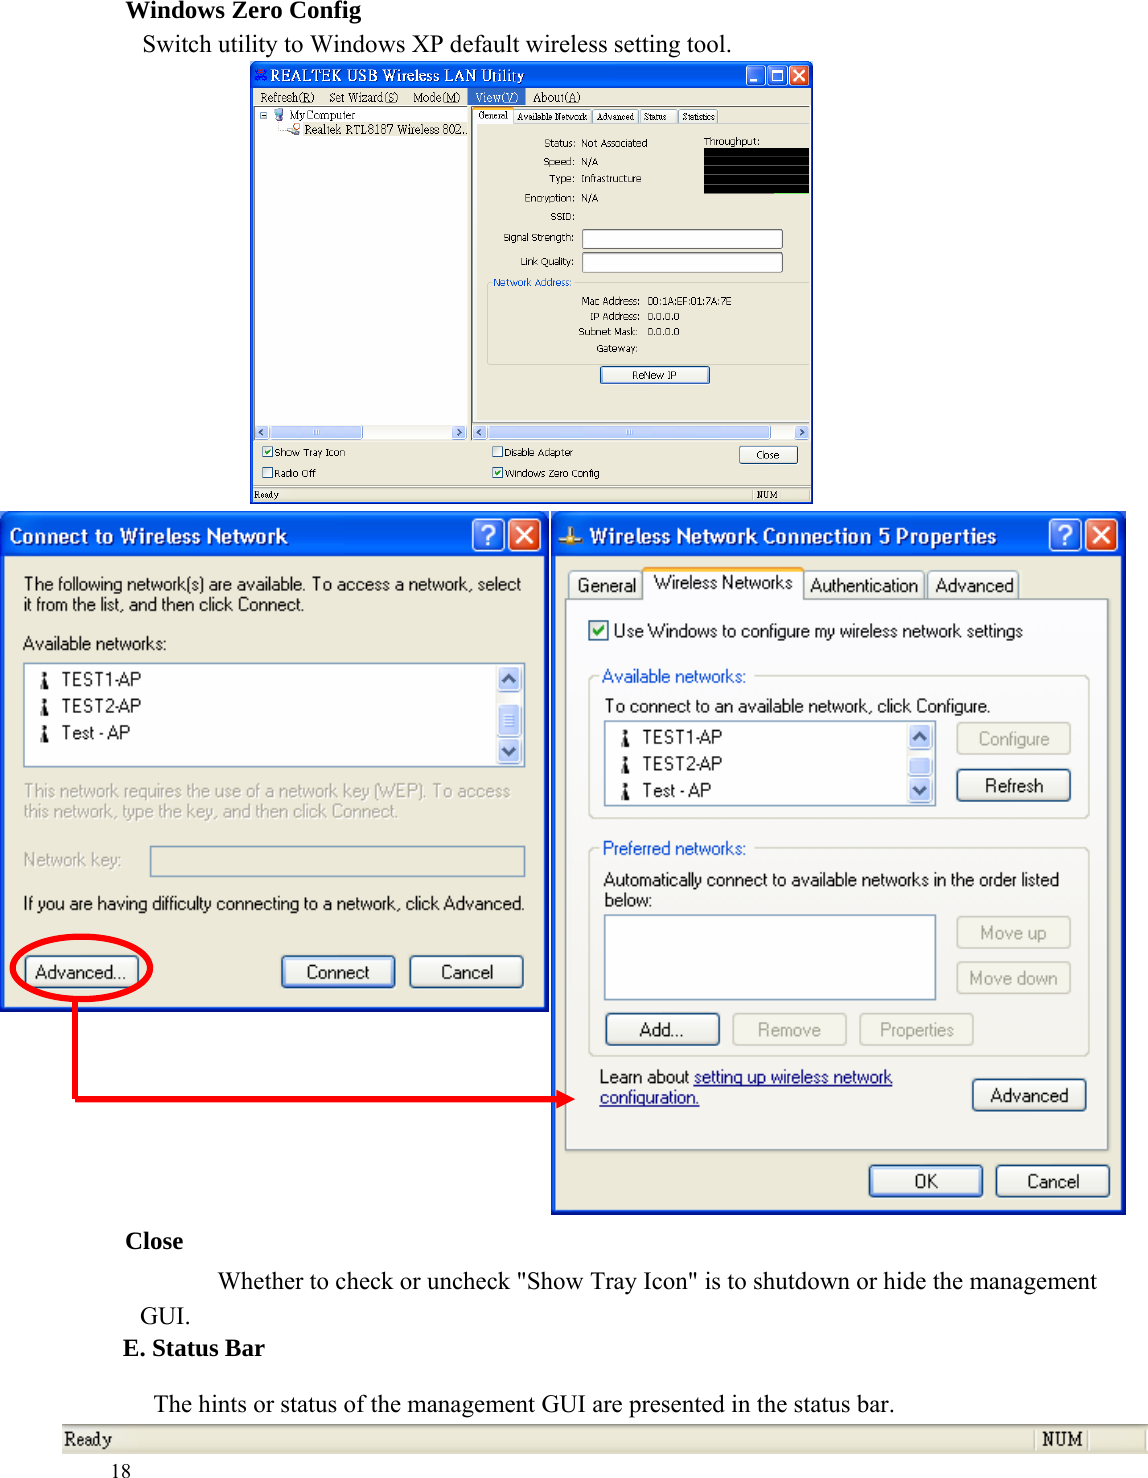 Windows Zero Config Switch utility to Windows XP default wireless setting tool.                        Close Whether to check or uncheck &quot;Show Tray Icon&quot; is to shutdown or hide the management GUI. E. Status Bar  The hints or status of the management GUI are presented in the status bar.  18 